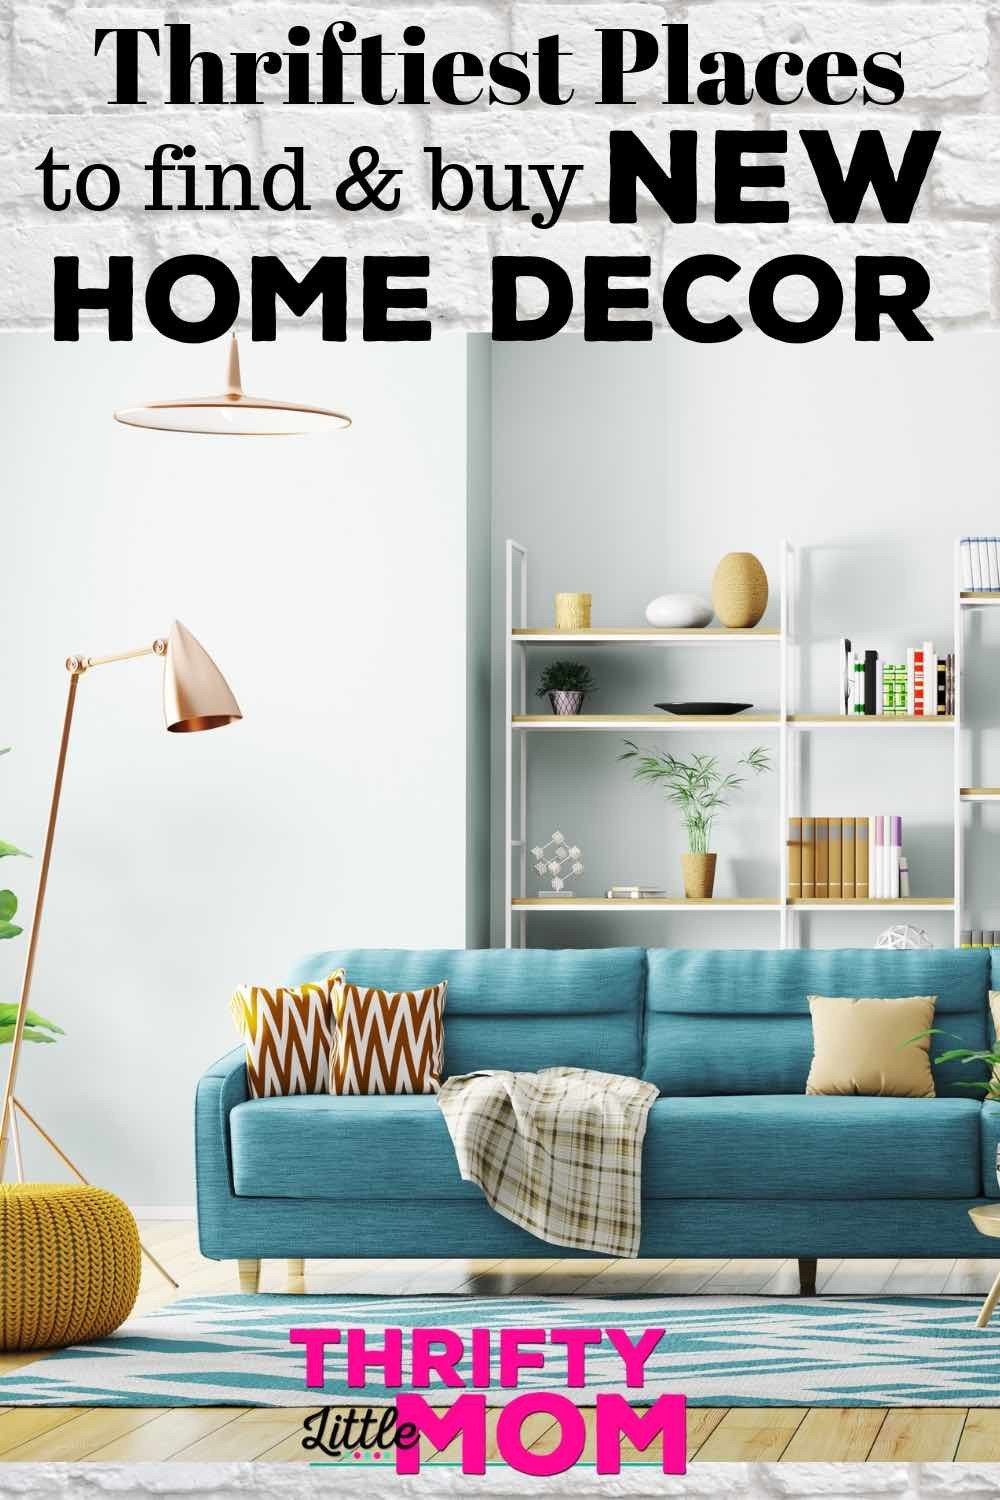 Places to Buy Home Decor Unique Thriftiest Places Near You for Home Decor Furniture &amp; Accessories